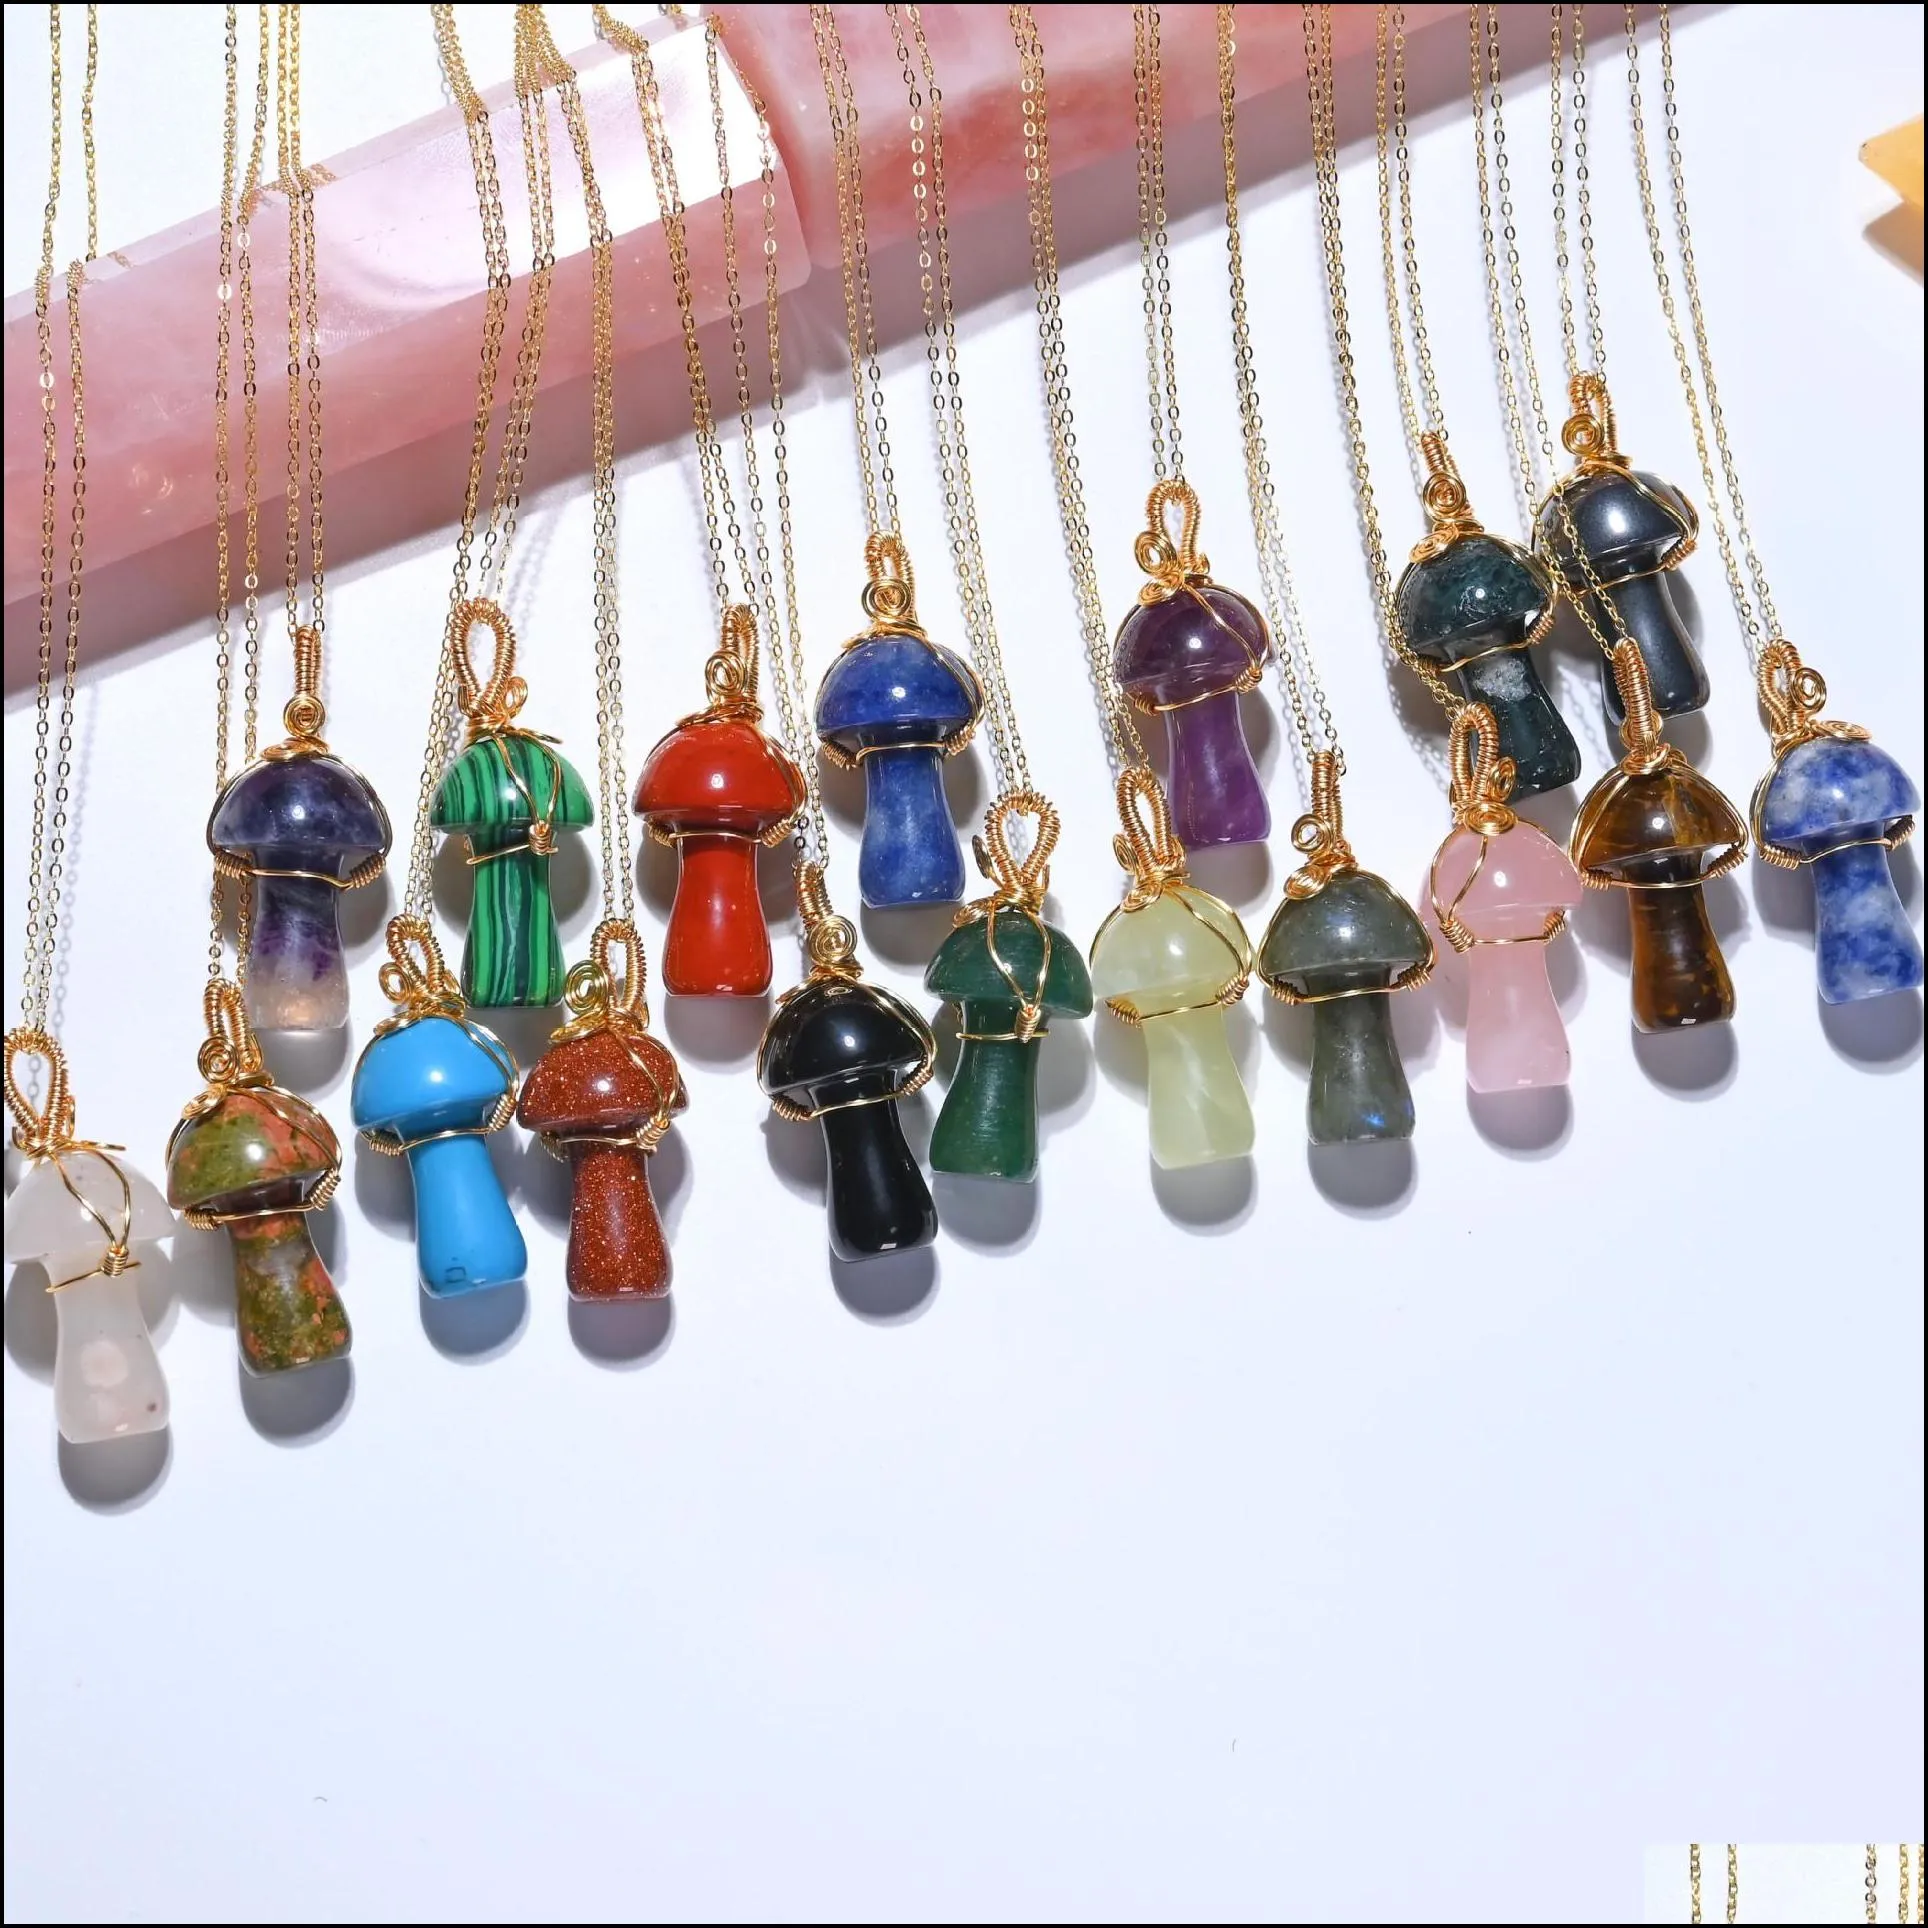 luxurious mushroom carved stone gemstones pendant charms wire wrap women healing crystals figurine pendant necklace jewelry